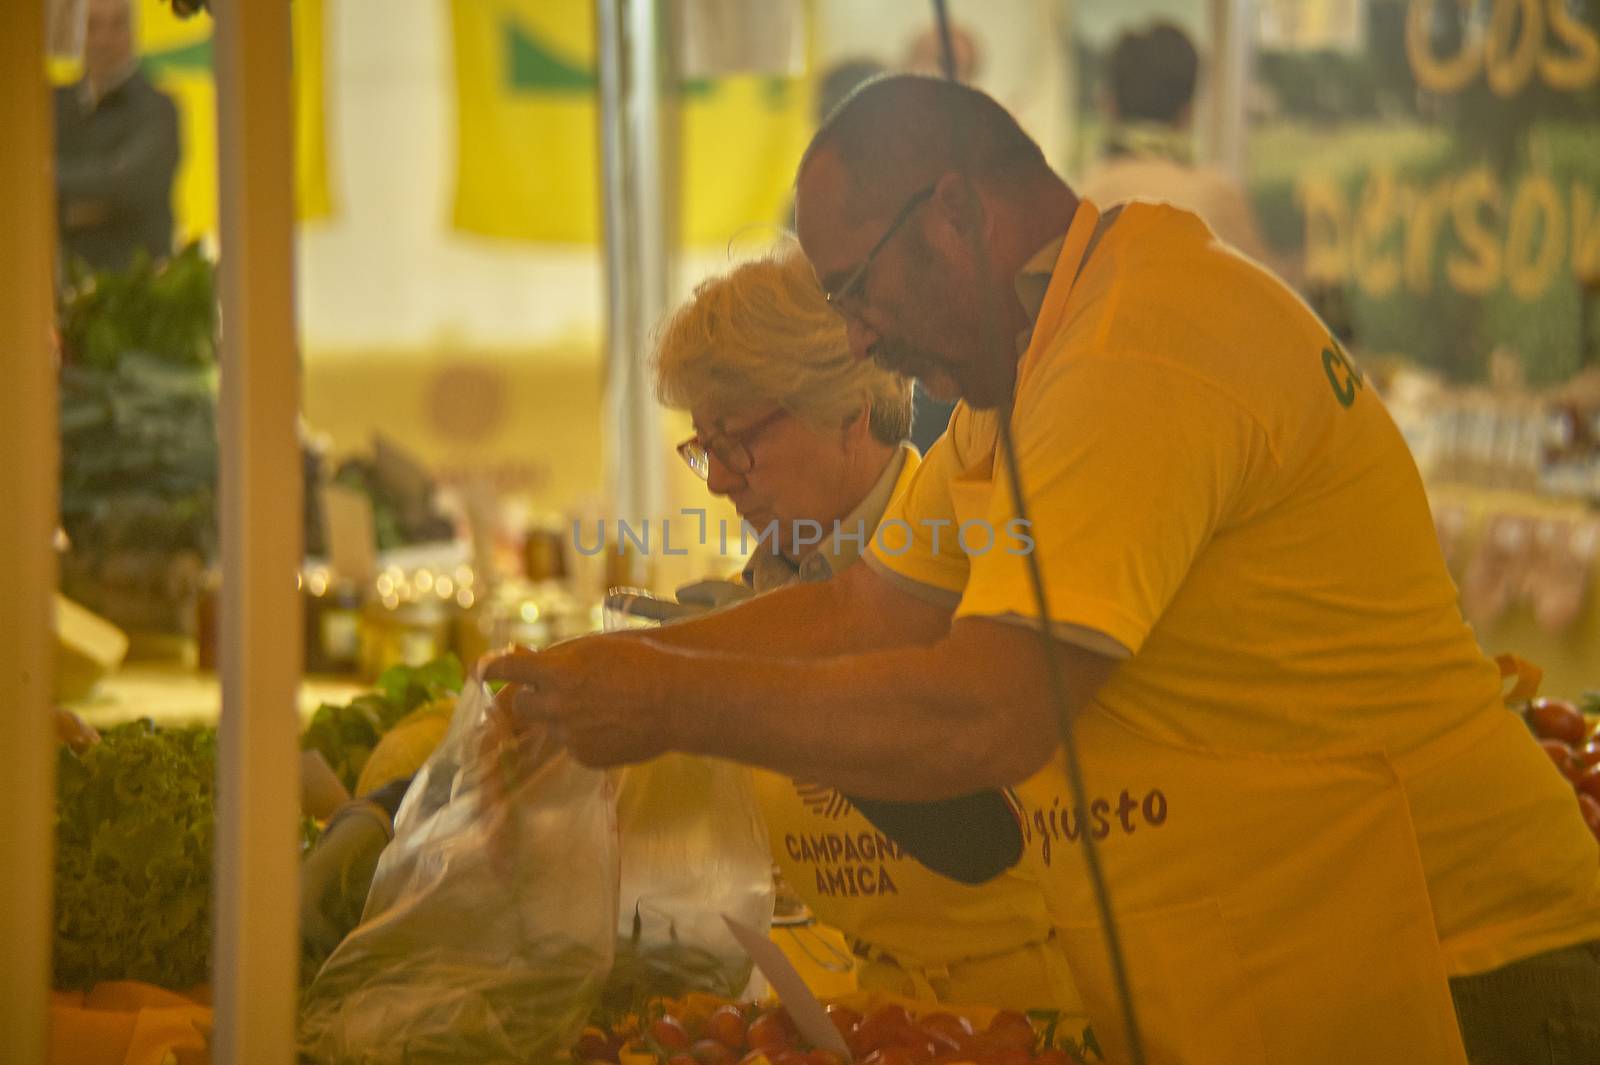 Fruit and vegetable market organized by Coldiretti and Campagna Amica association by pippocarlot